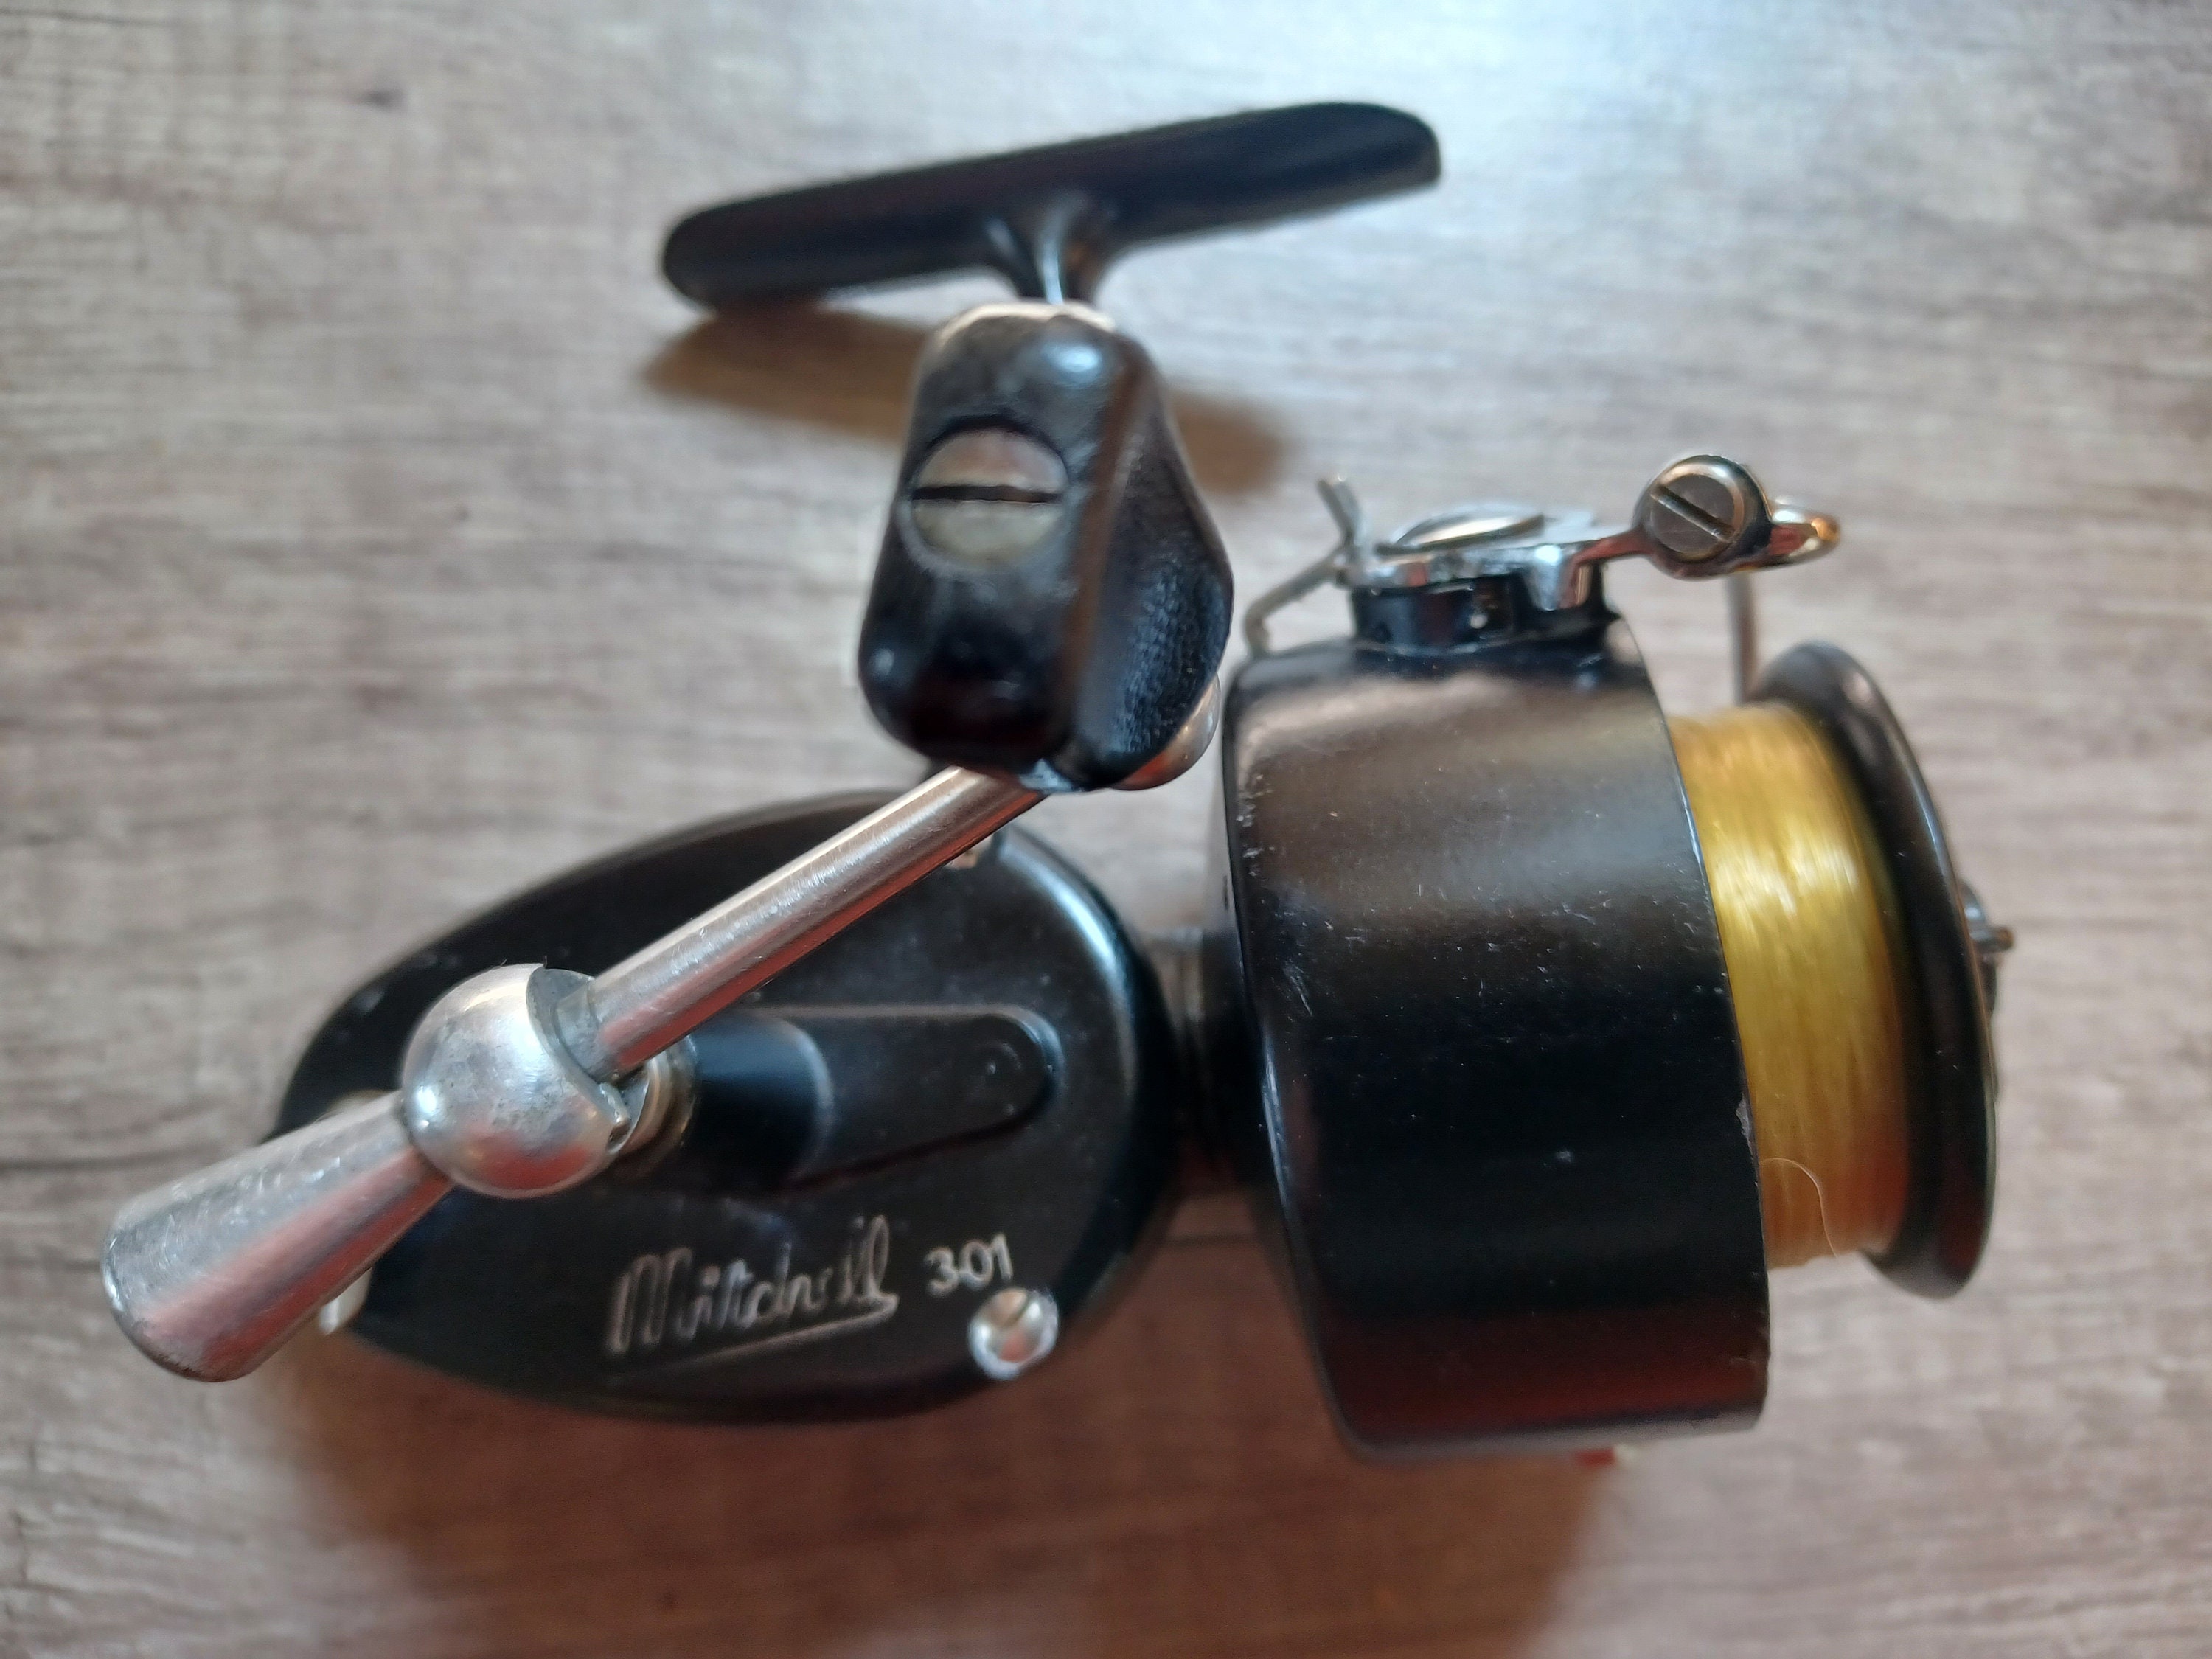 An Excellent Vintage Mitchell 301 Spinning Reel Circa 1964